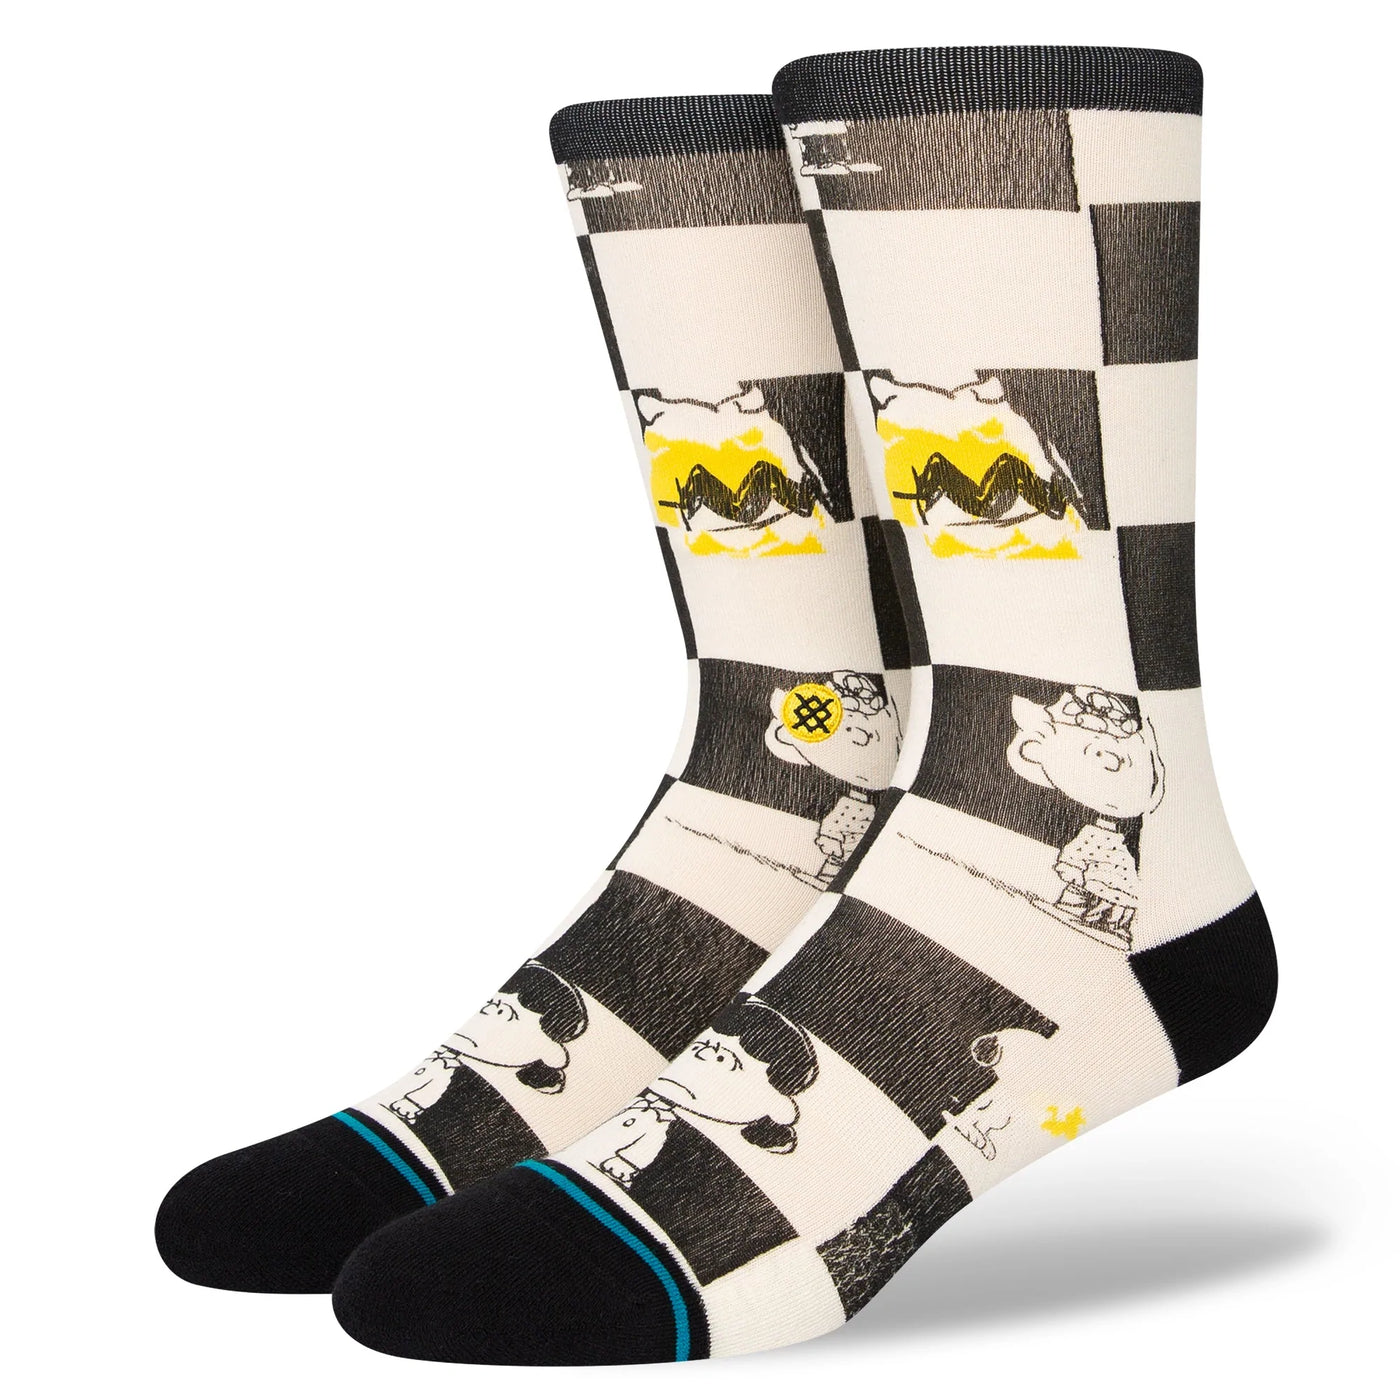 Stance calcetines negros a cuadros